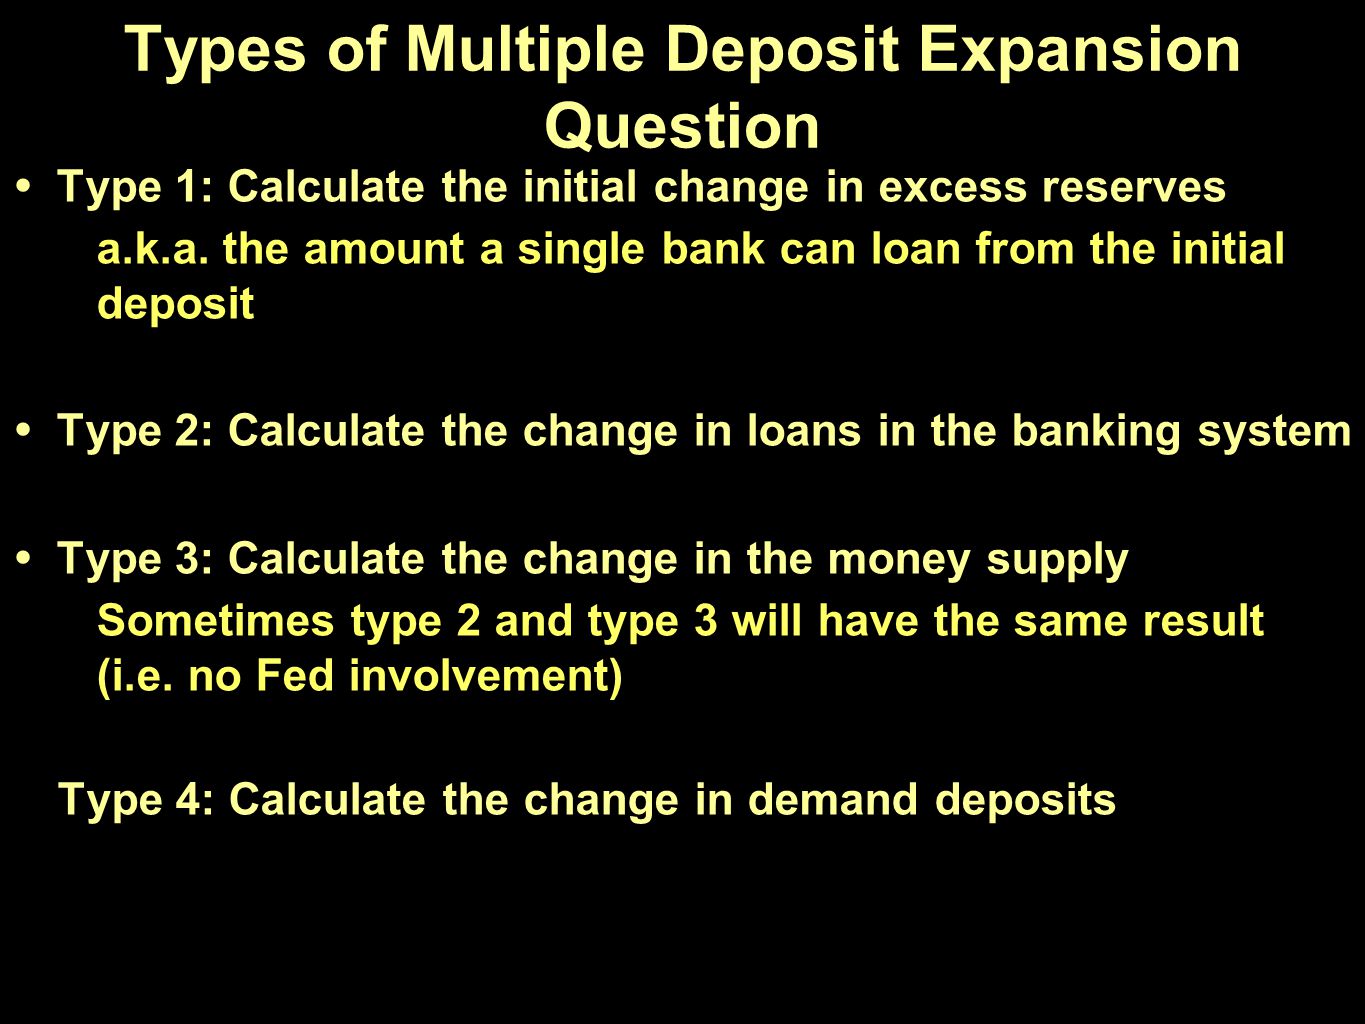 Types of Multiple Deposit Expansion Question